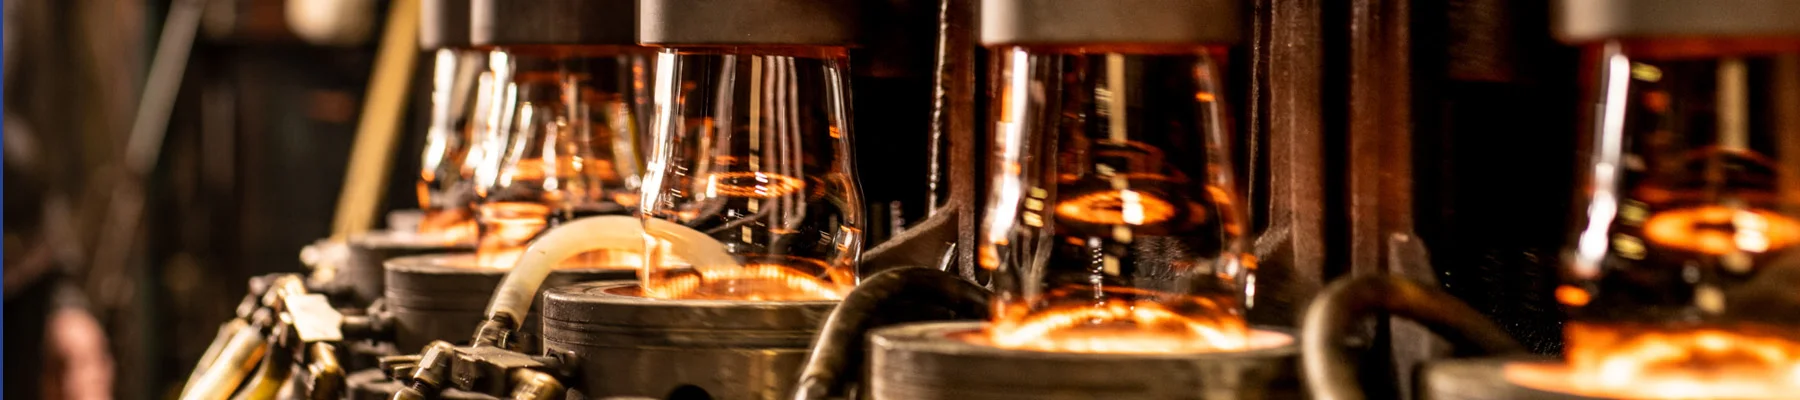 Libbey Glass production